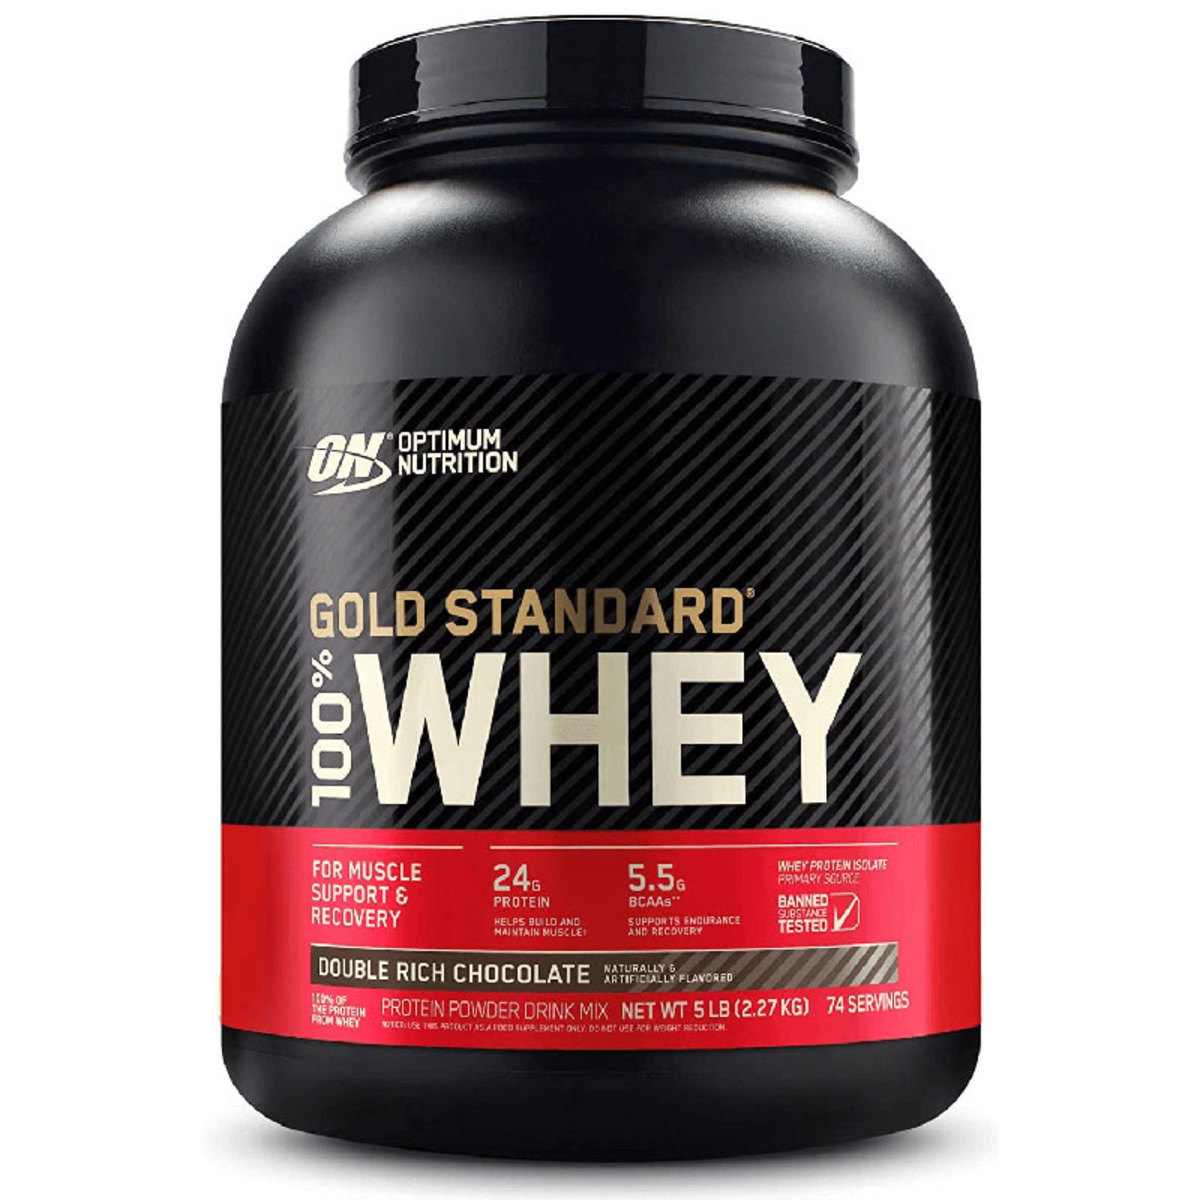 The 5 Best Post-Workout Recovery Supplements (2021) Gold Standard Whey Protein